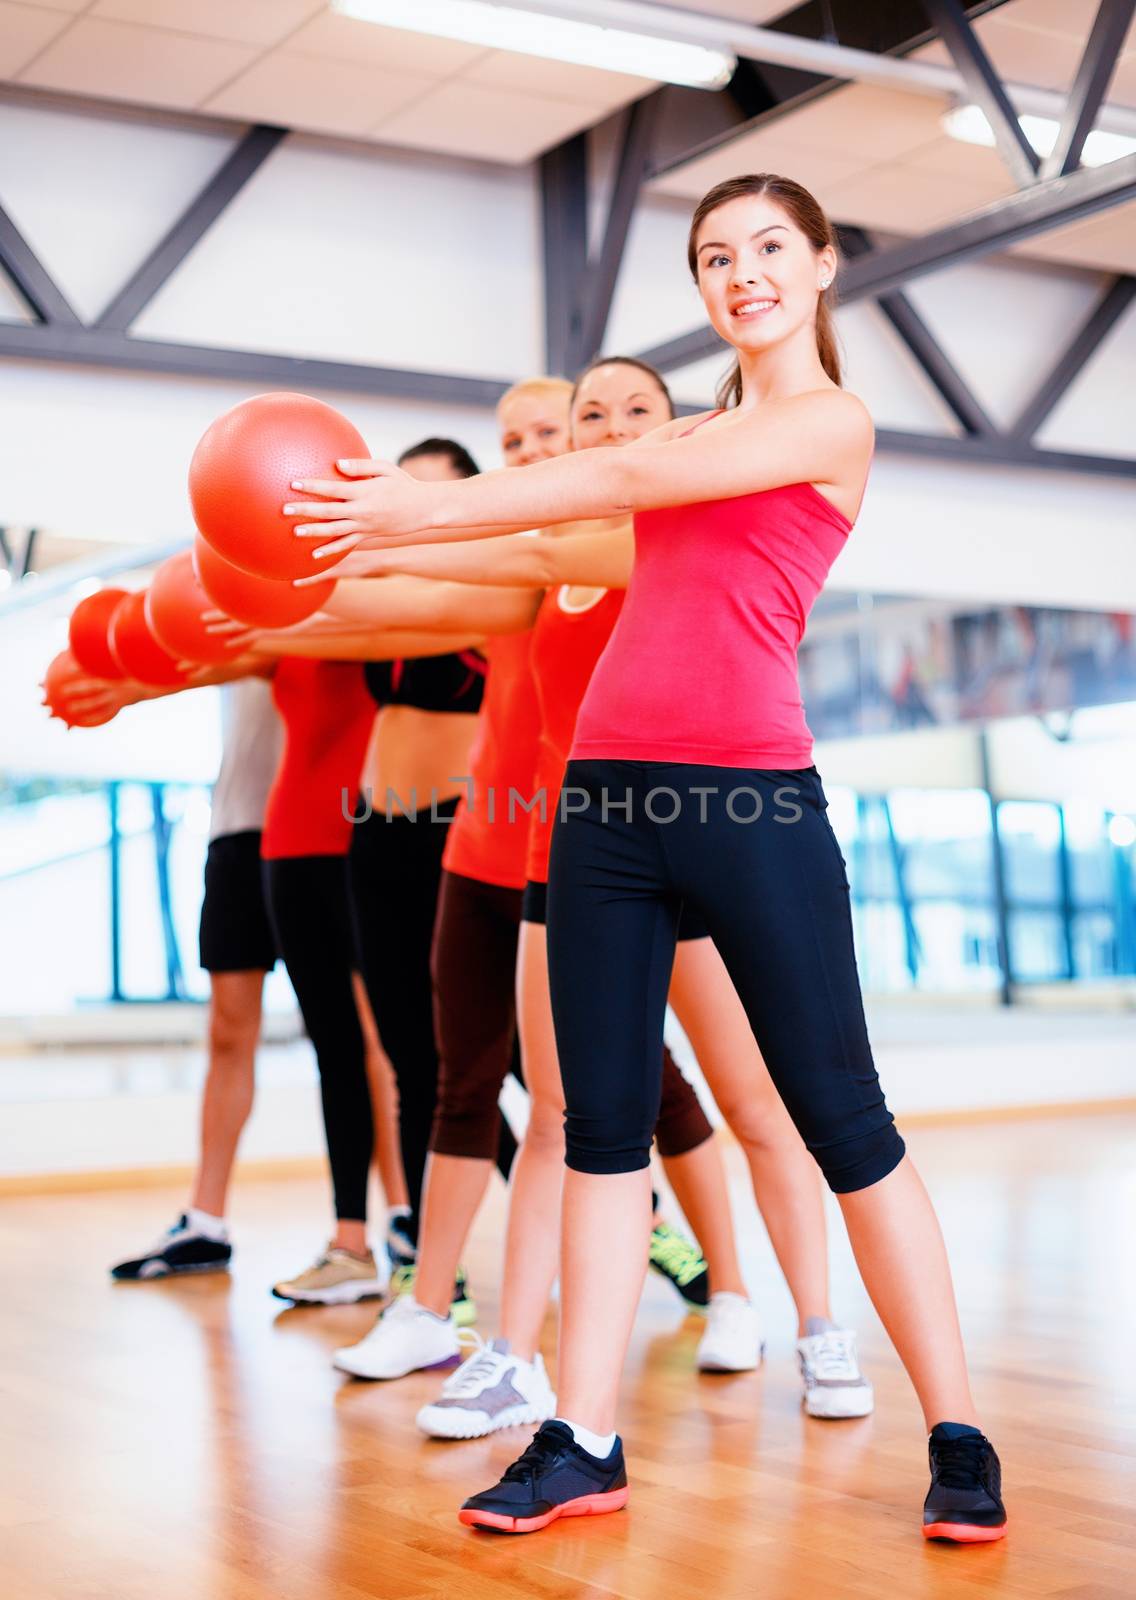 fitness, sport, training, gym and lifestyle concept - group of smiling people working out with stability balls in the gym